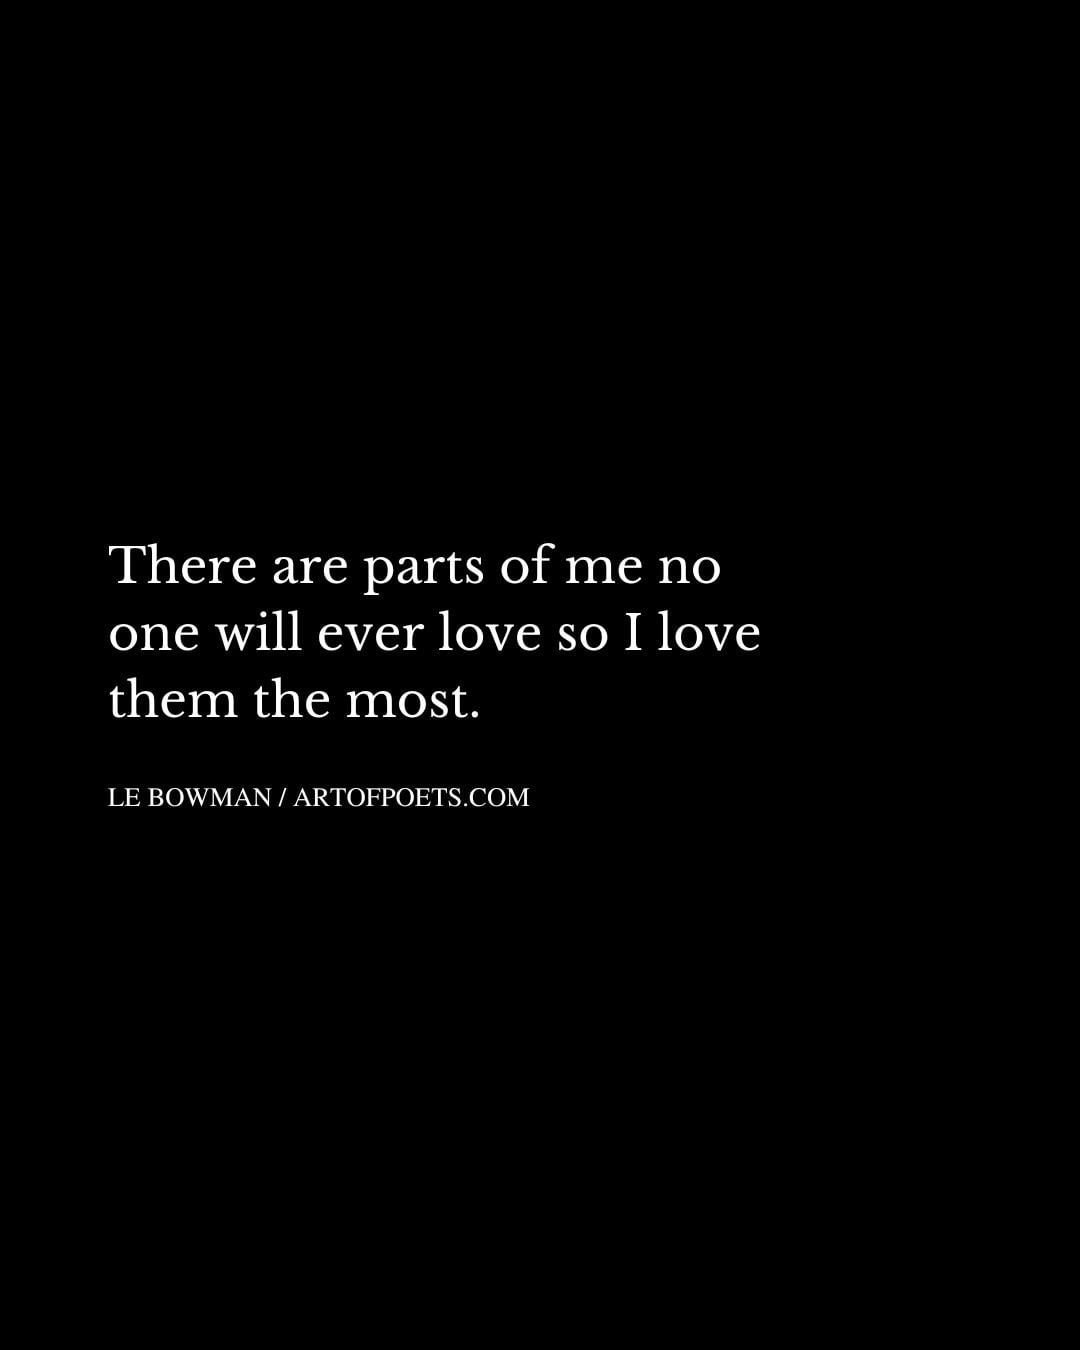 There are parts of me no one will ever love so I love them the most